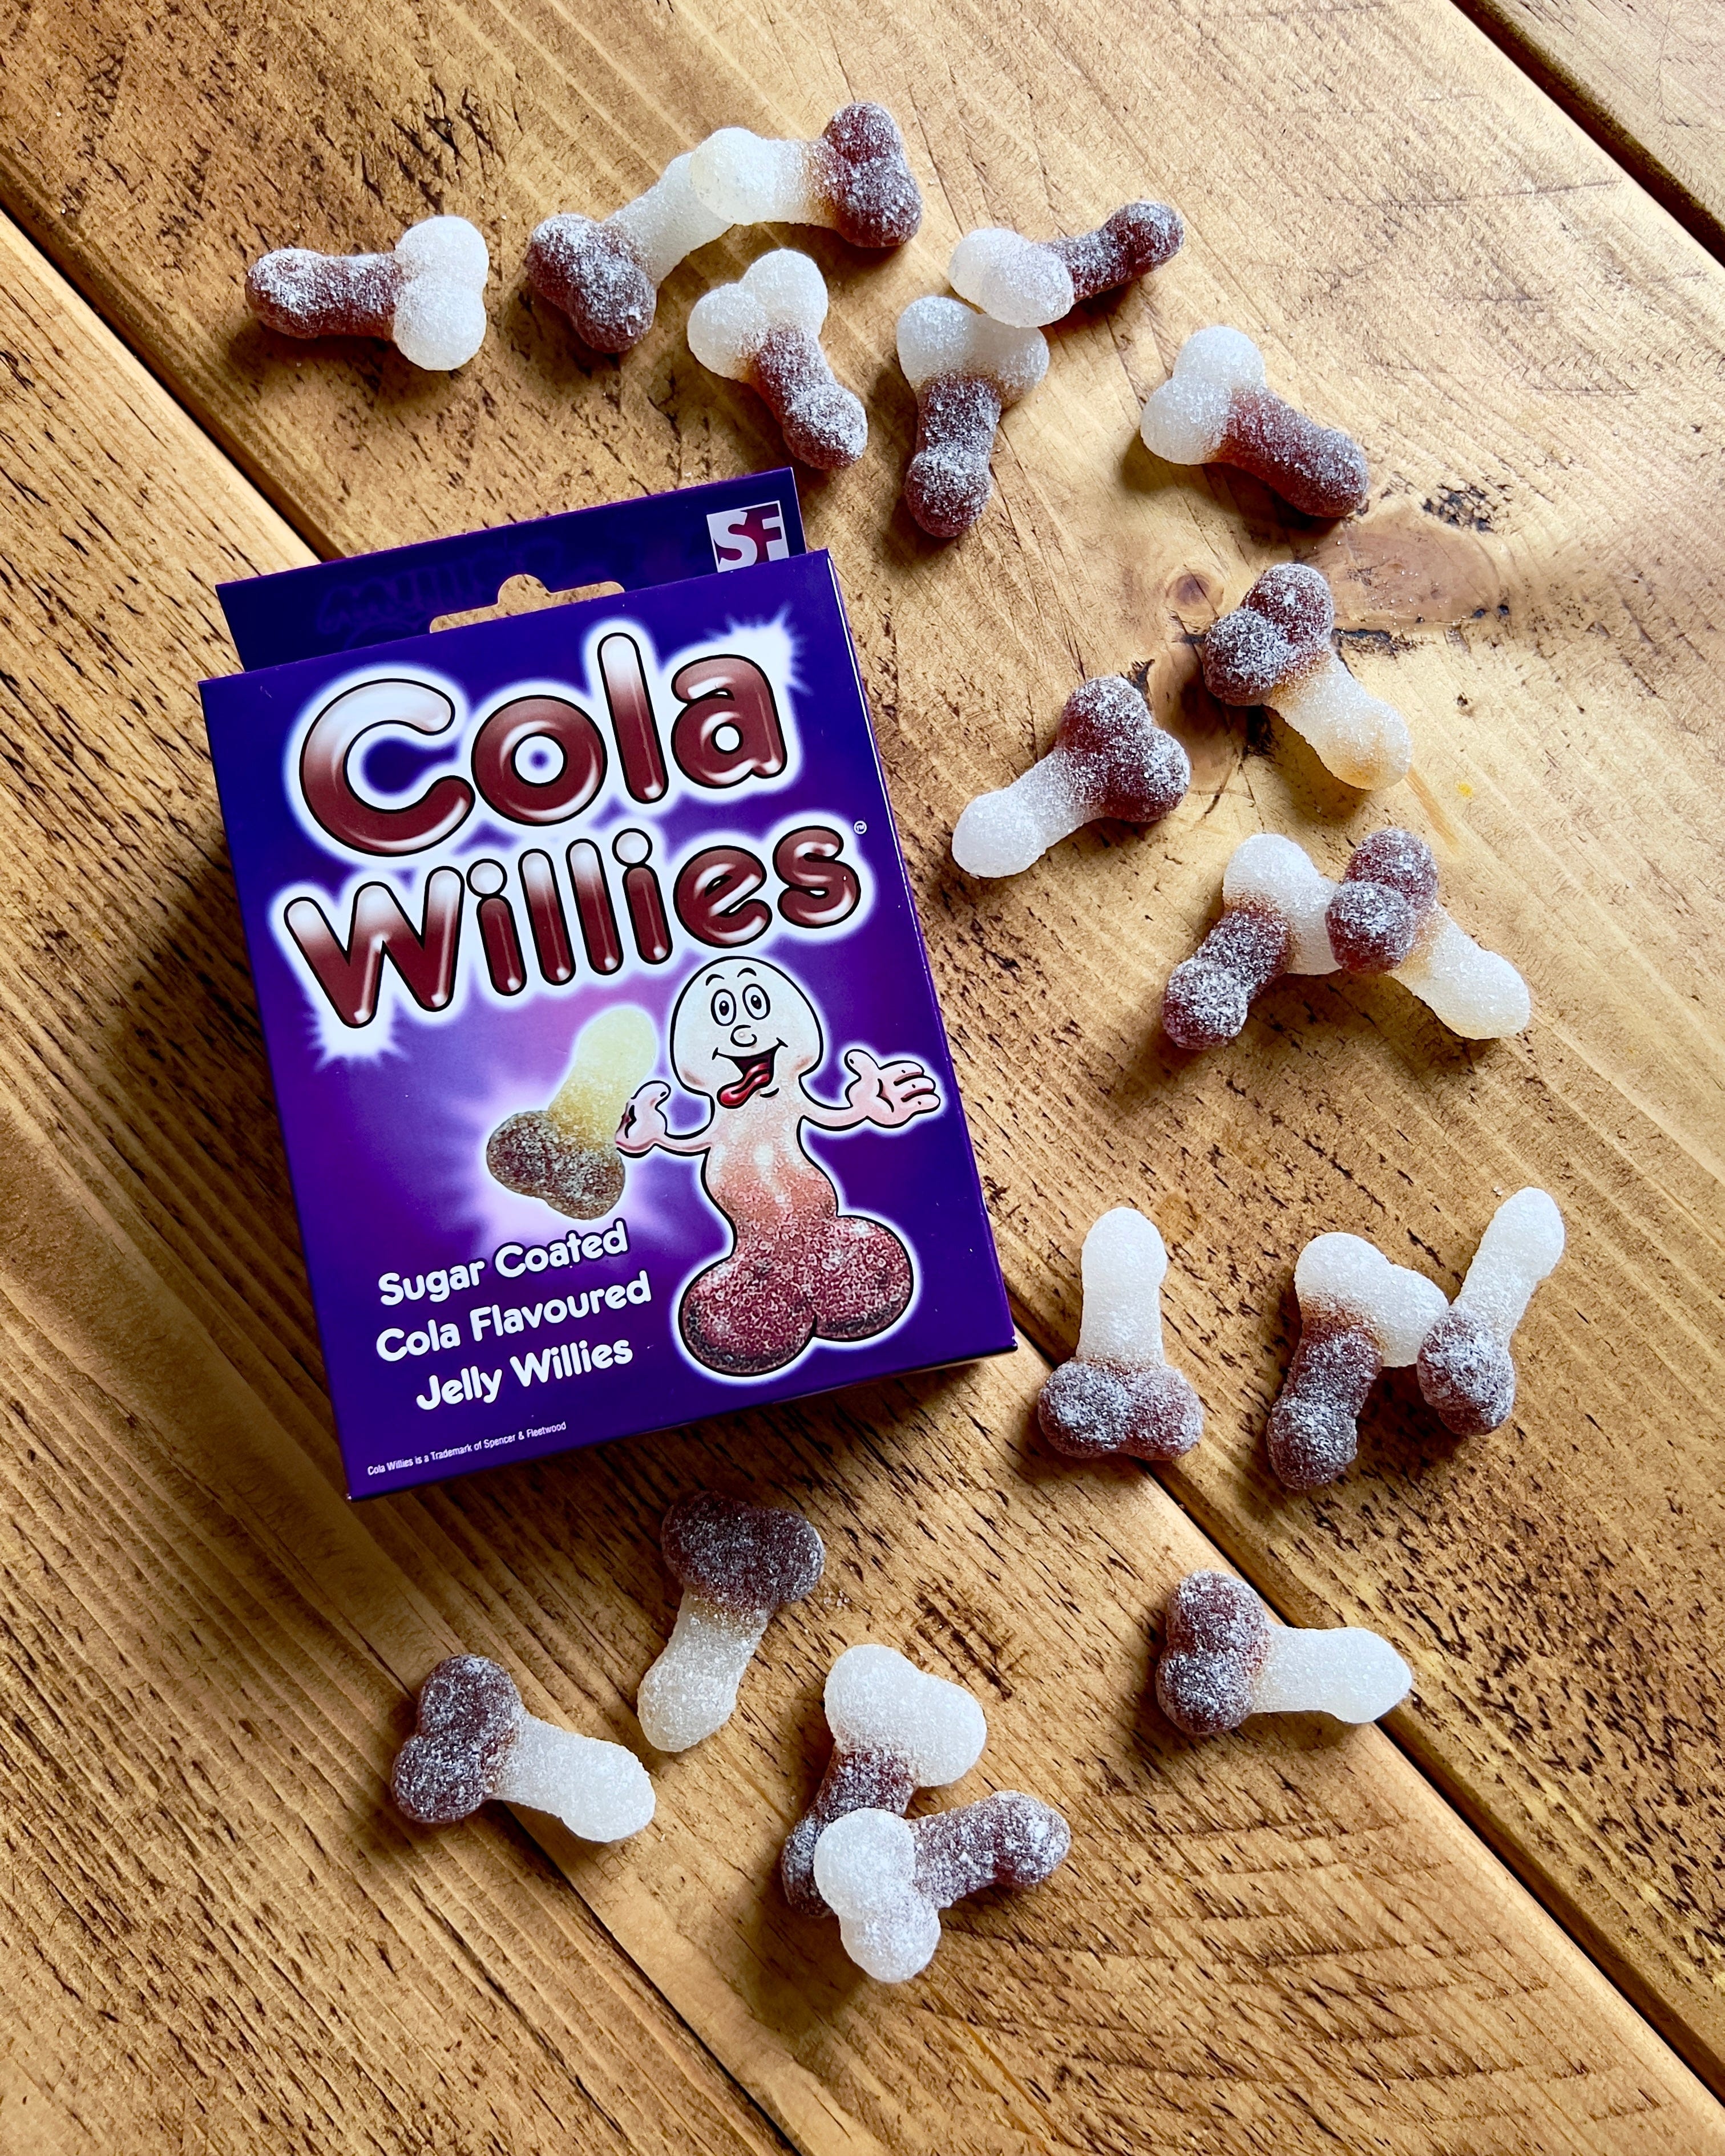 Cola willies - what's in the box